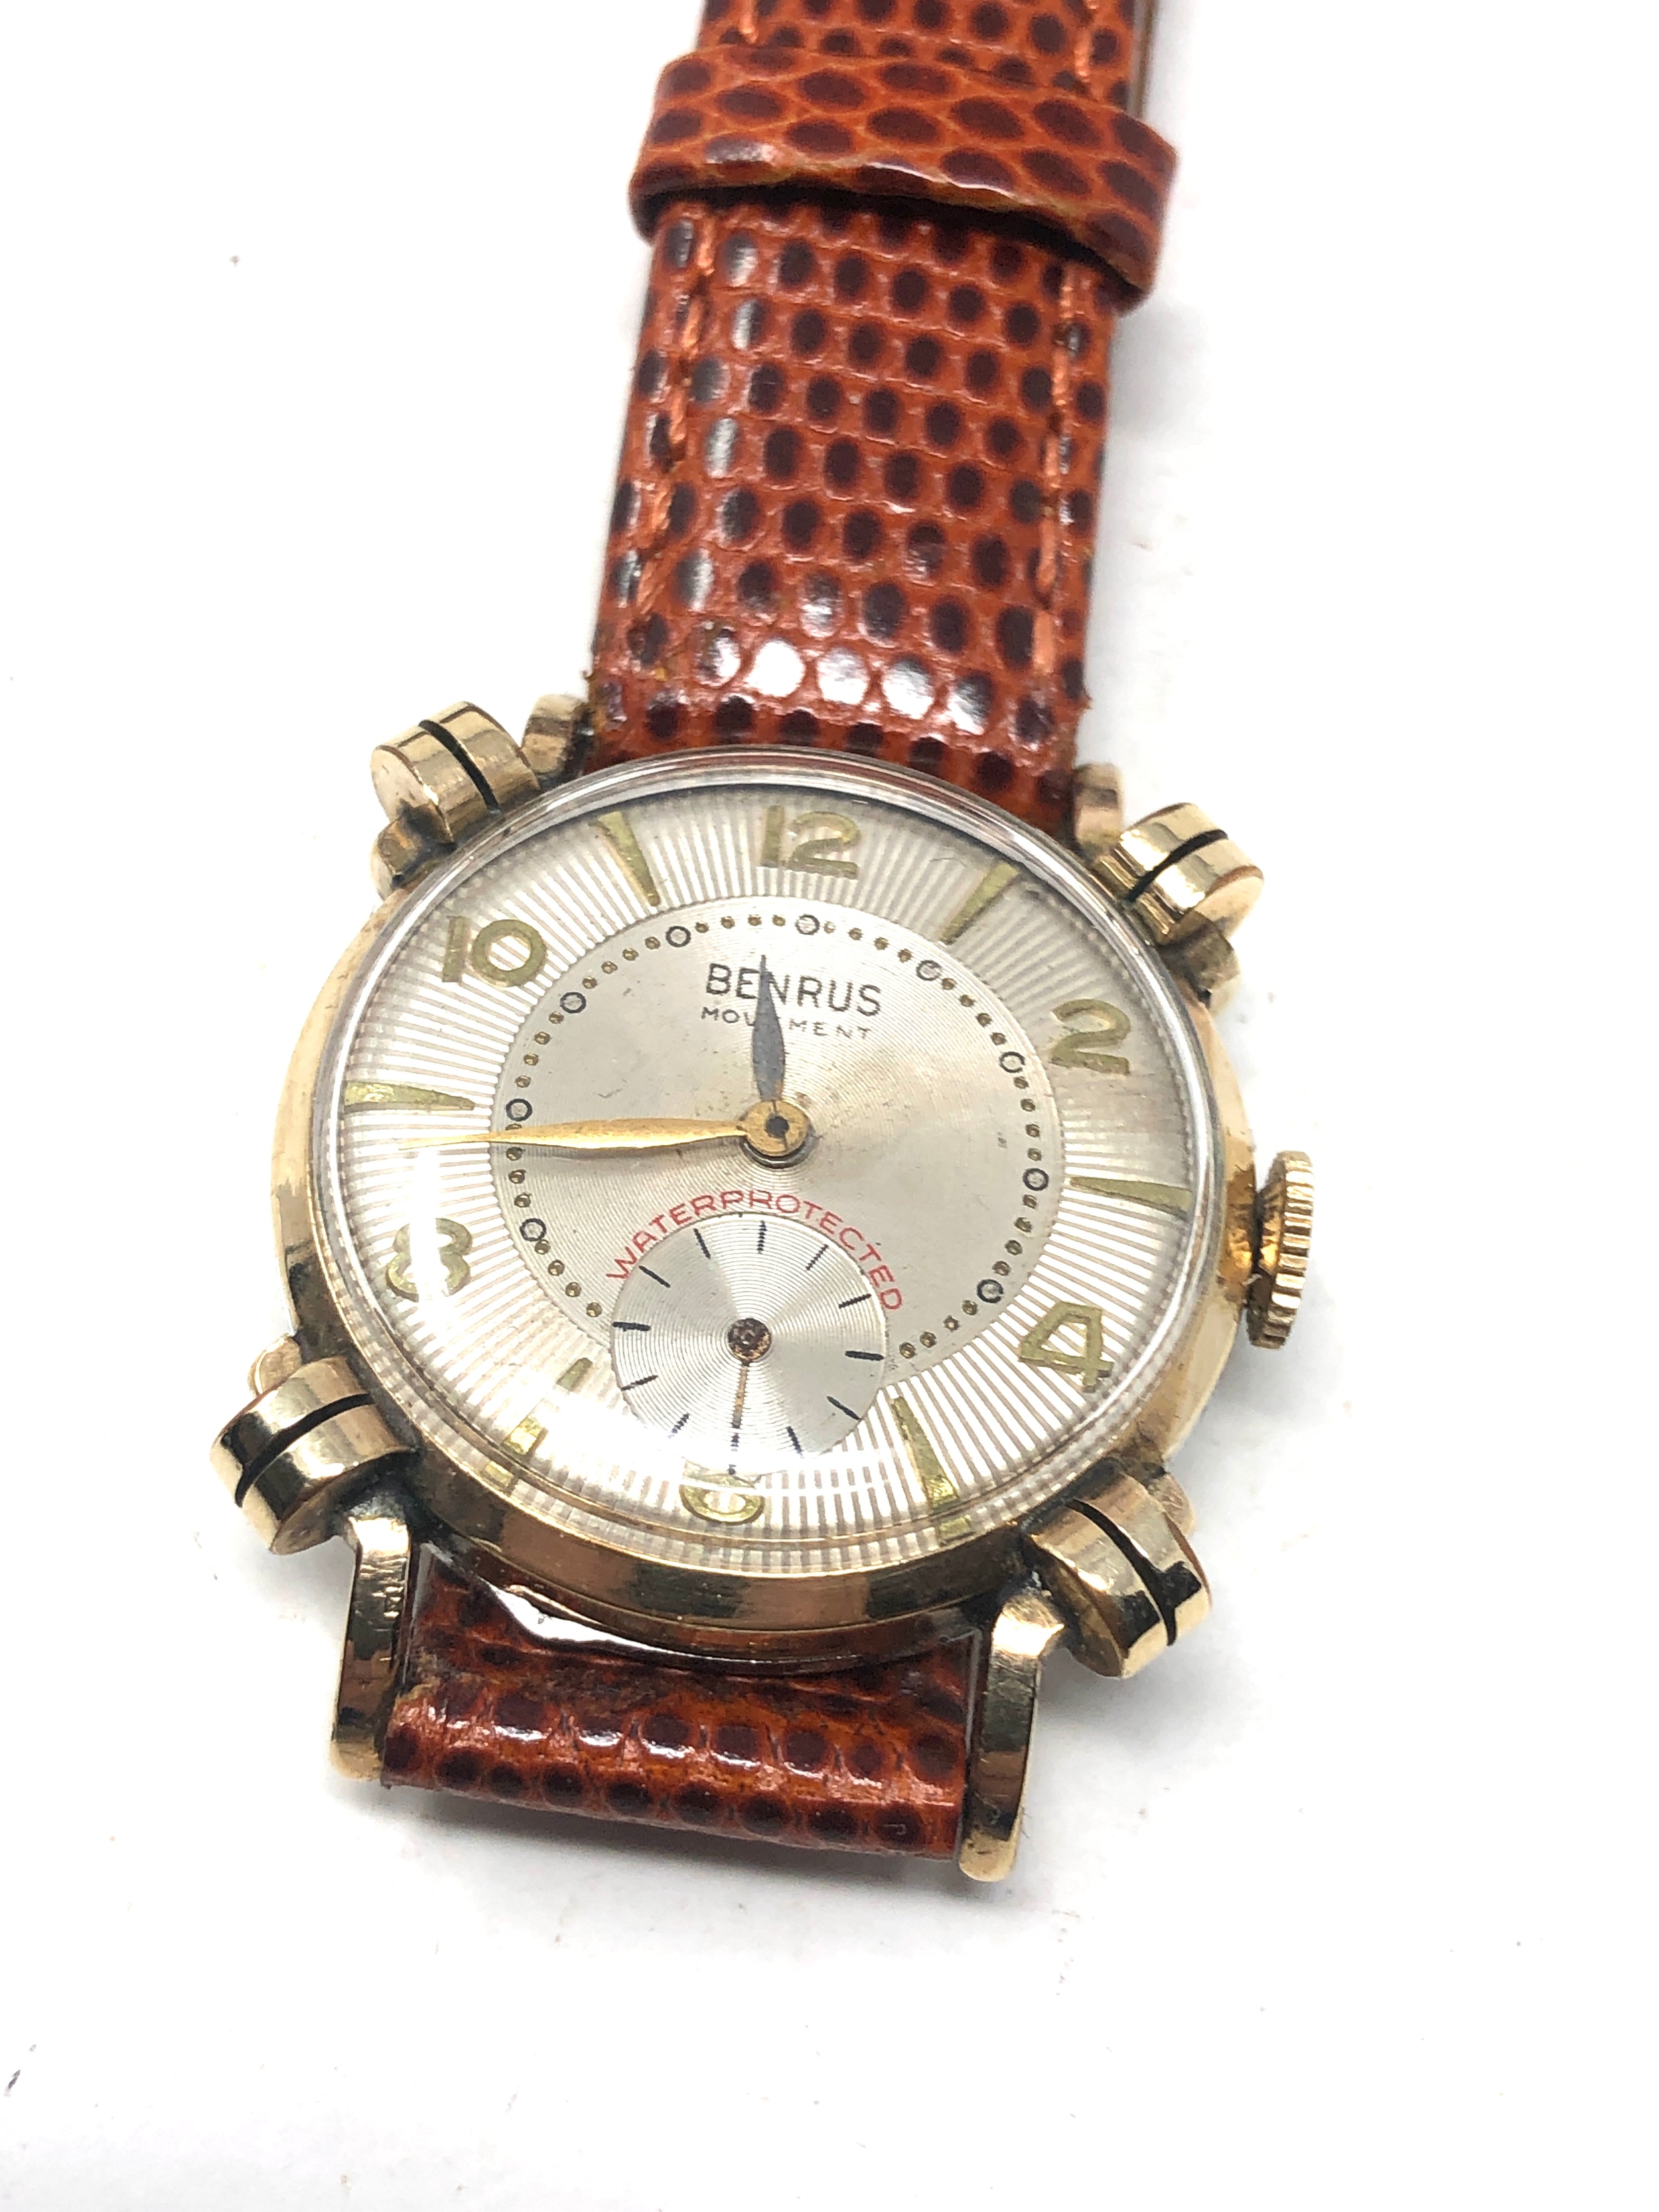 Vintage Benrus gents wristwatch the watch is ticking - Image 2 of 4